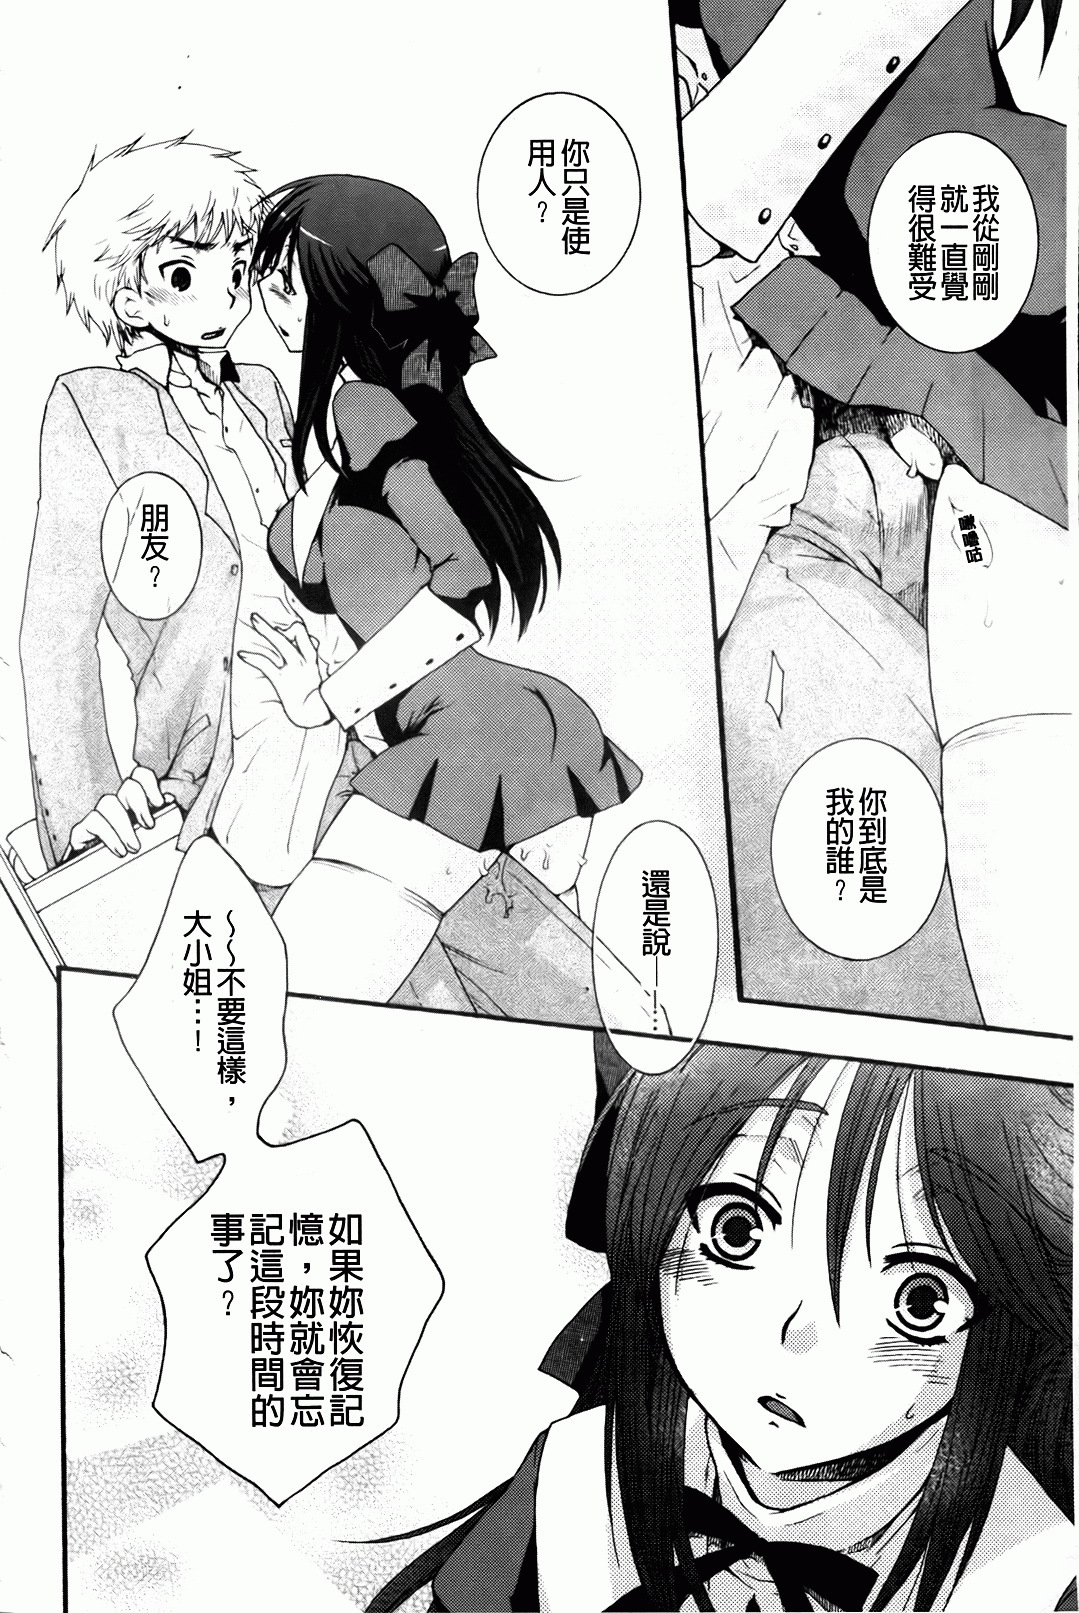 [Oonami Youko] Ojousama To Inu [Chinese] page 16 full